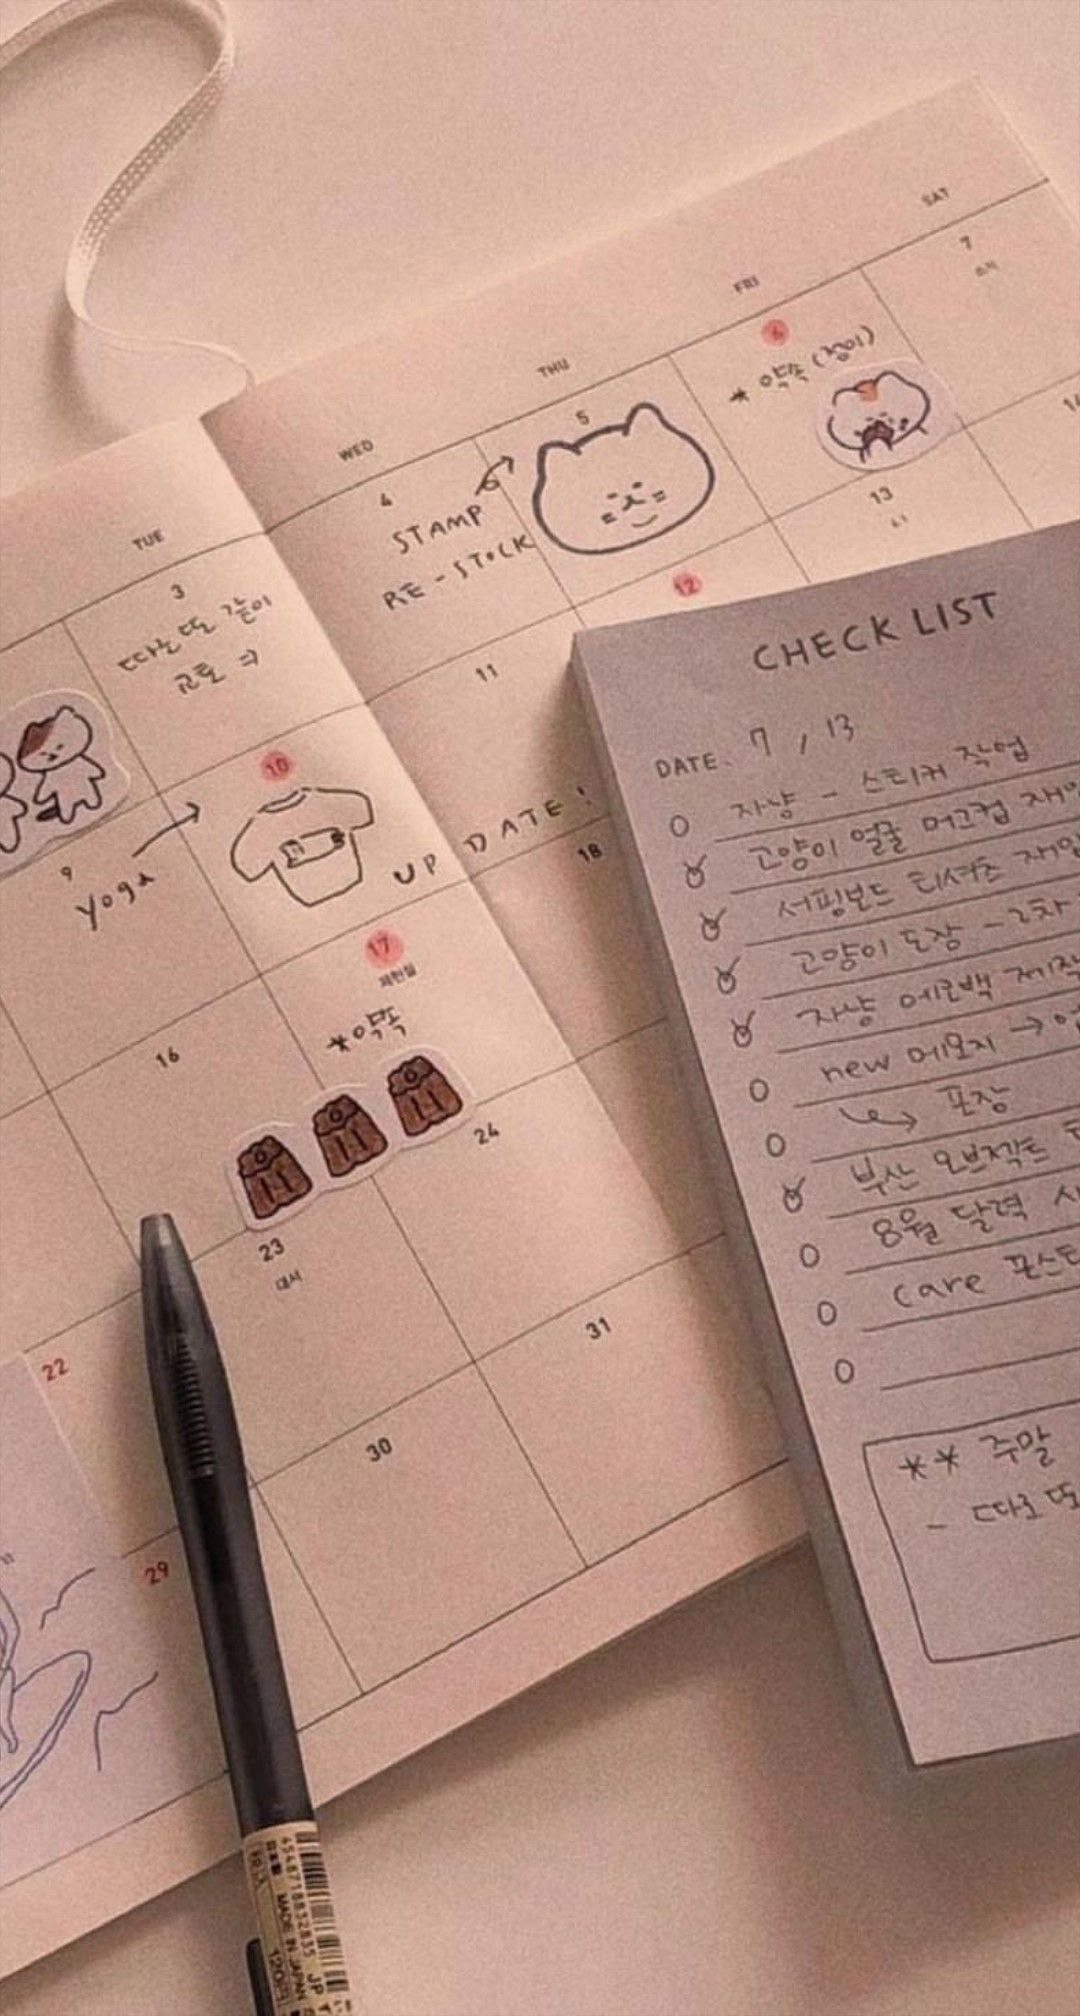 A calendar with stickers and notes - Study, school